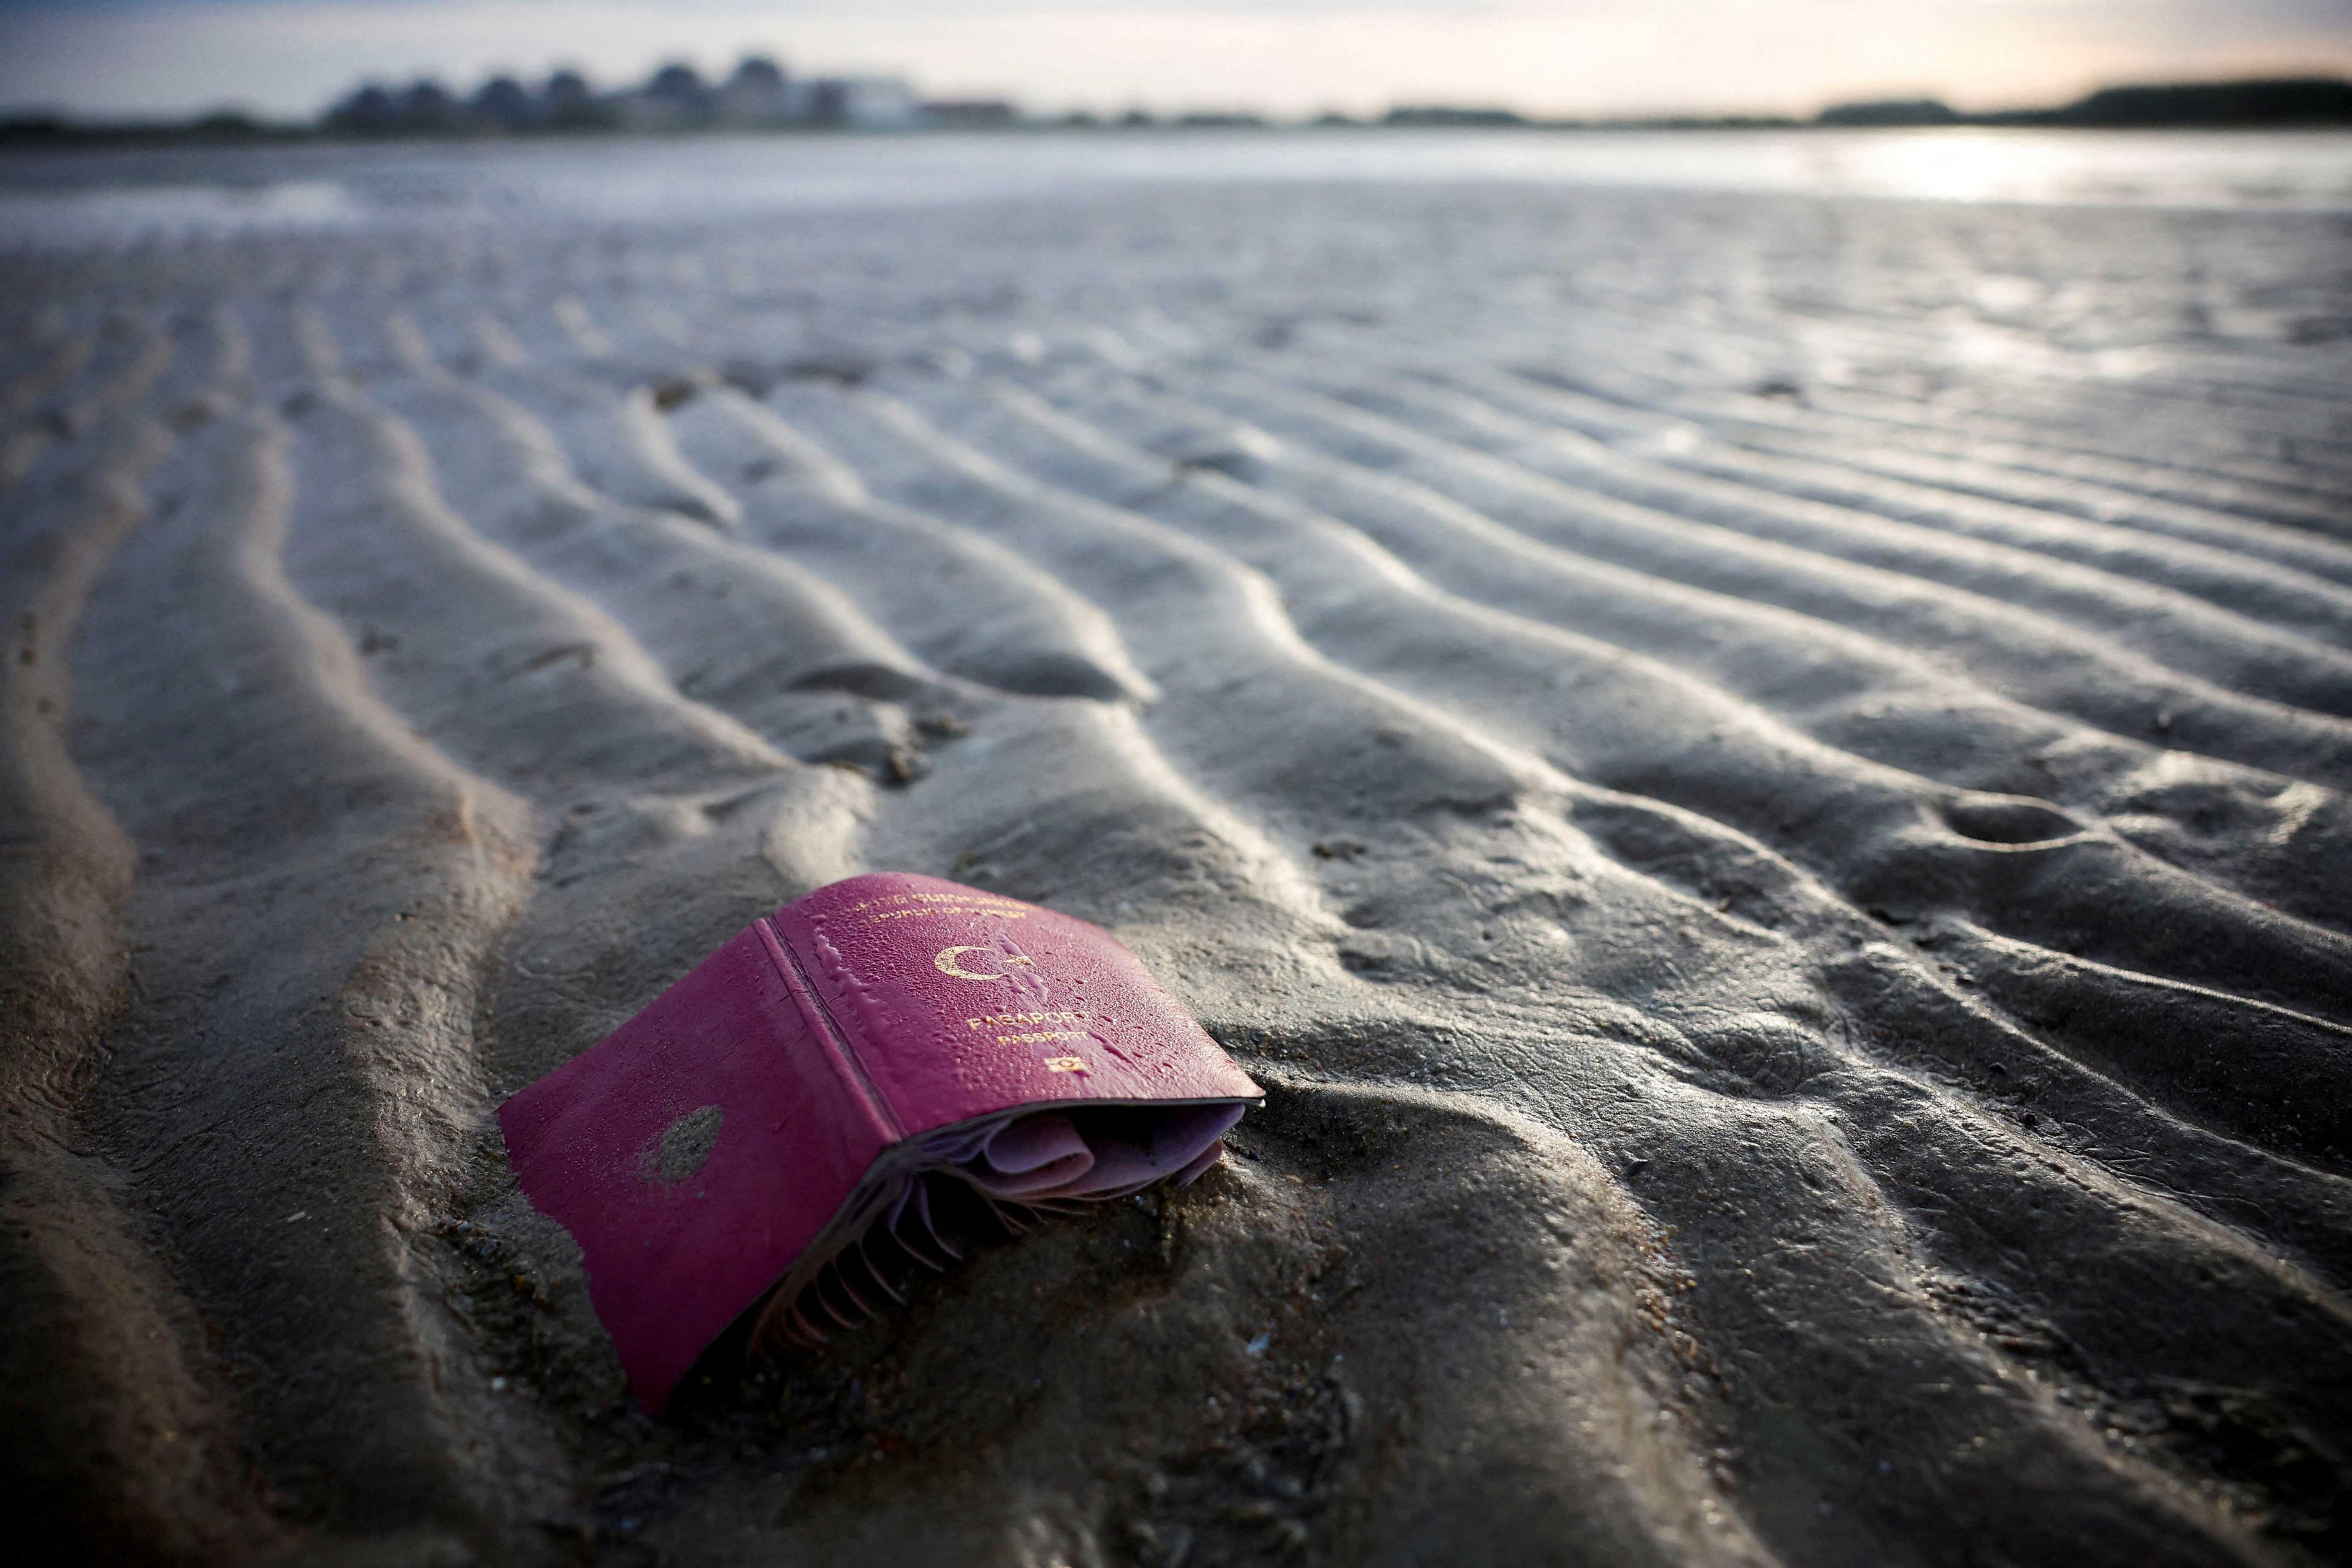 A passport is seen on the beach after a group of migrants traveled on an inflatable dinghy to leave the coast of northern France and to cross the English Channel, in Gravelines near Calais, northern France, Oct 30. Photo: Reuters